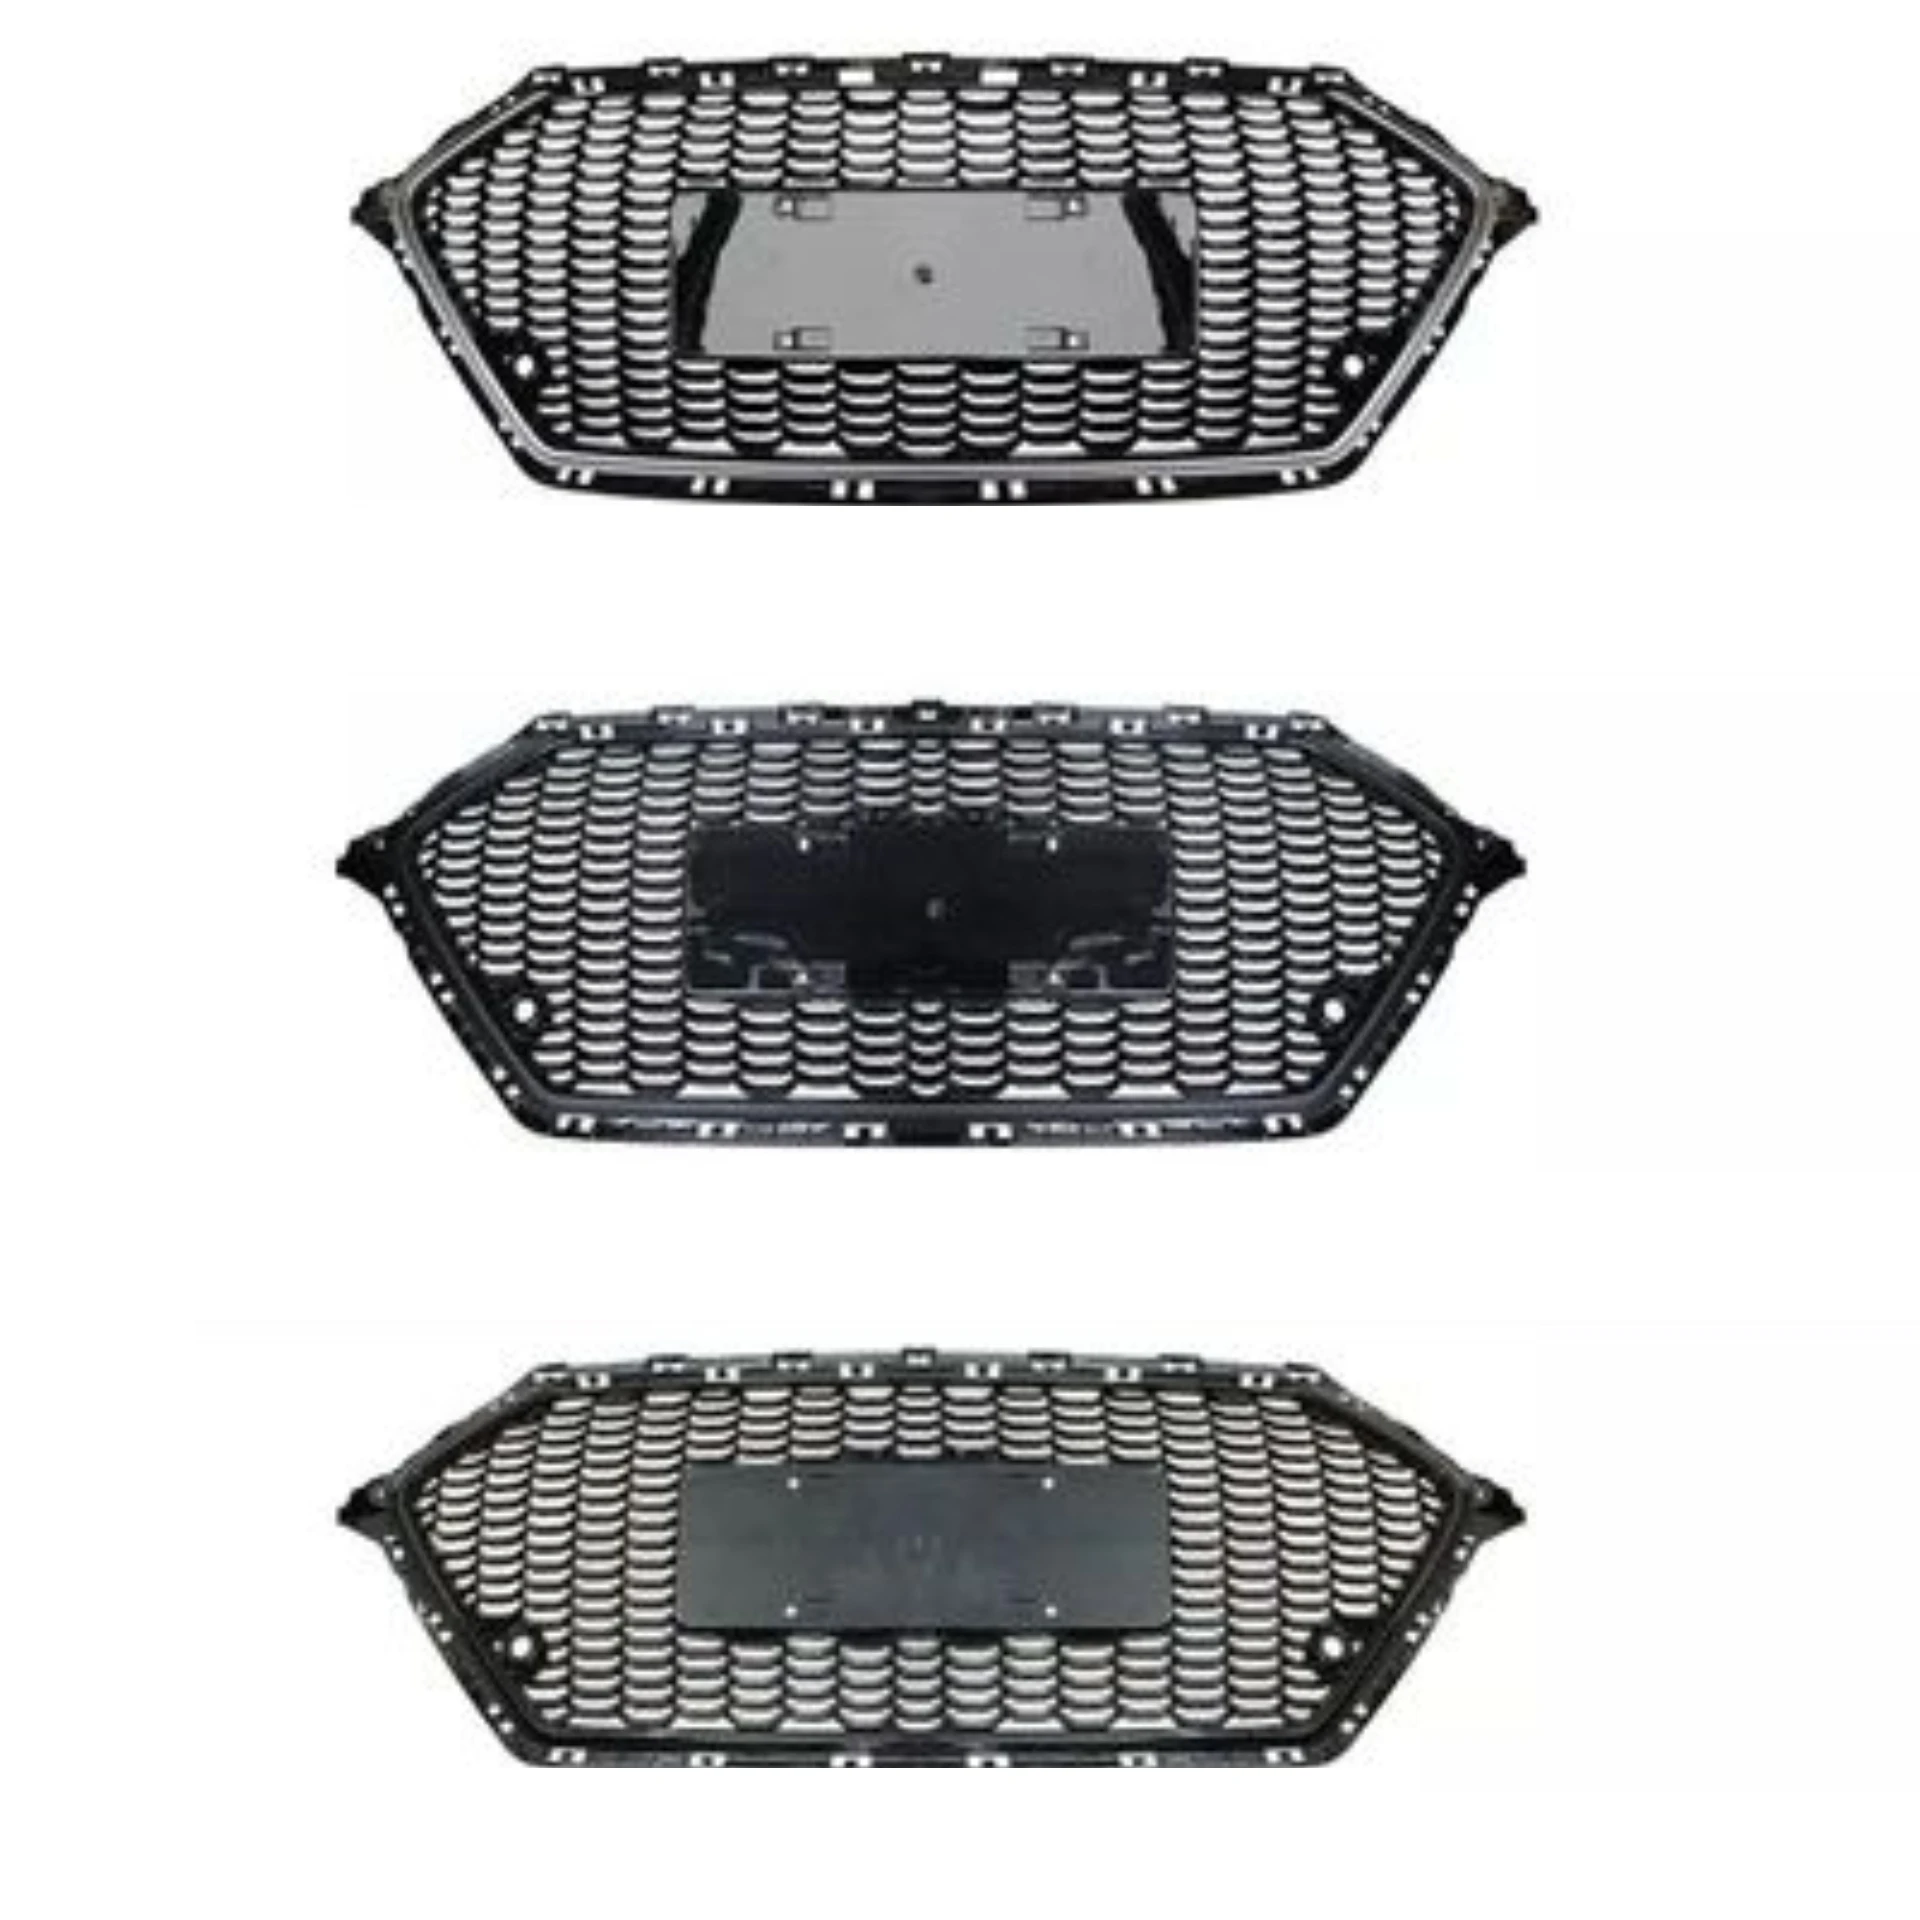 Radiator Grille For Hyundai Accent 1999-2012, Abs Plastic Accessories,  Protection, Auto Styling, Front Panel Decoration - Front & Radiator Grills  - AliExpress